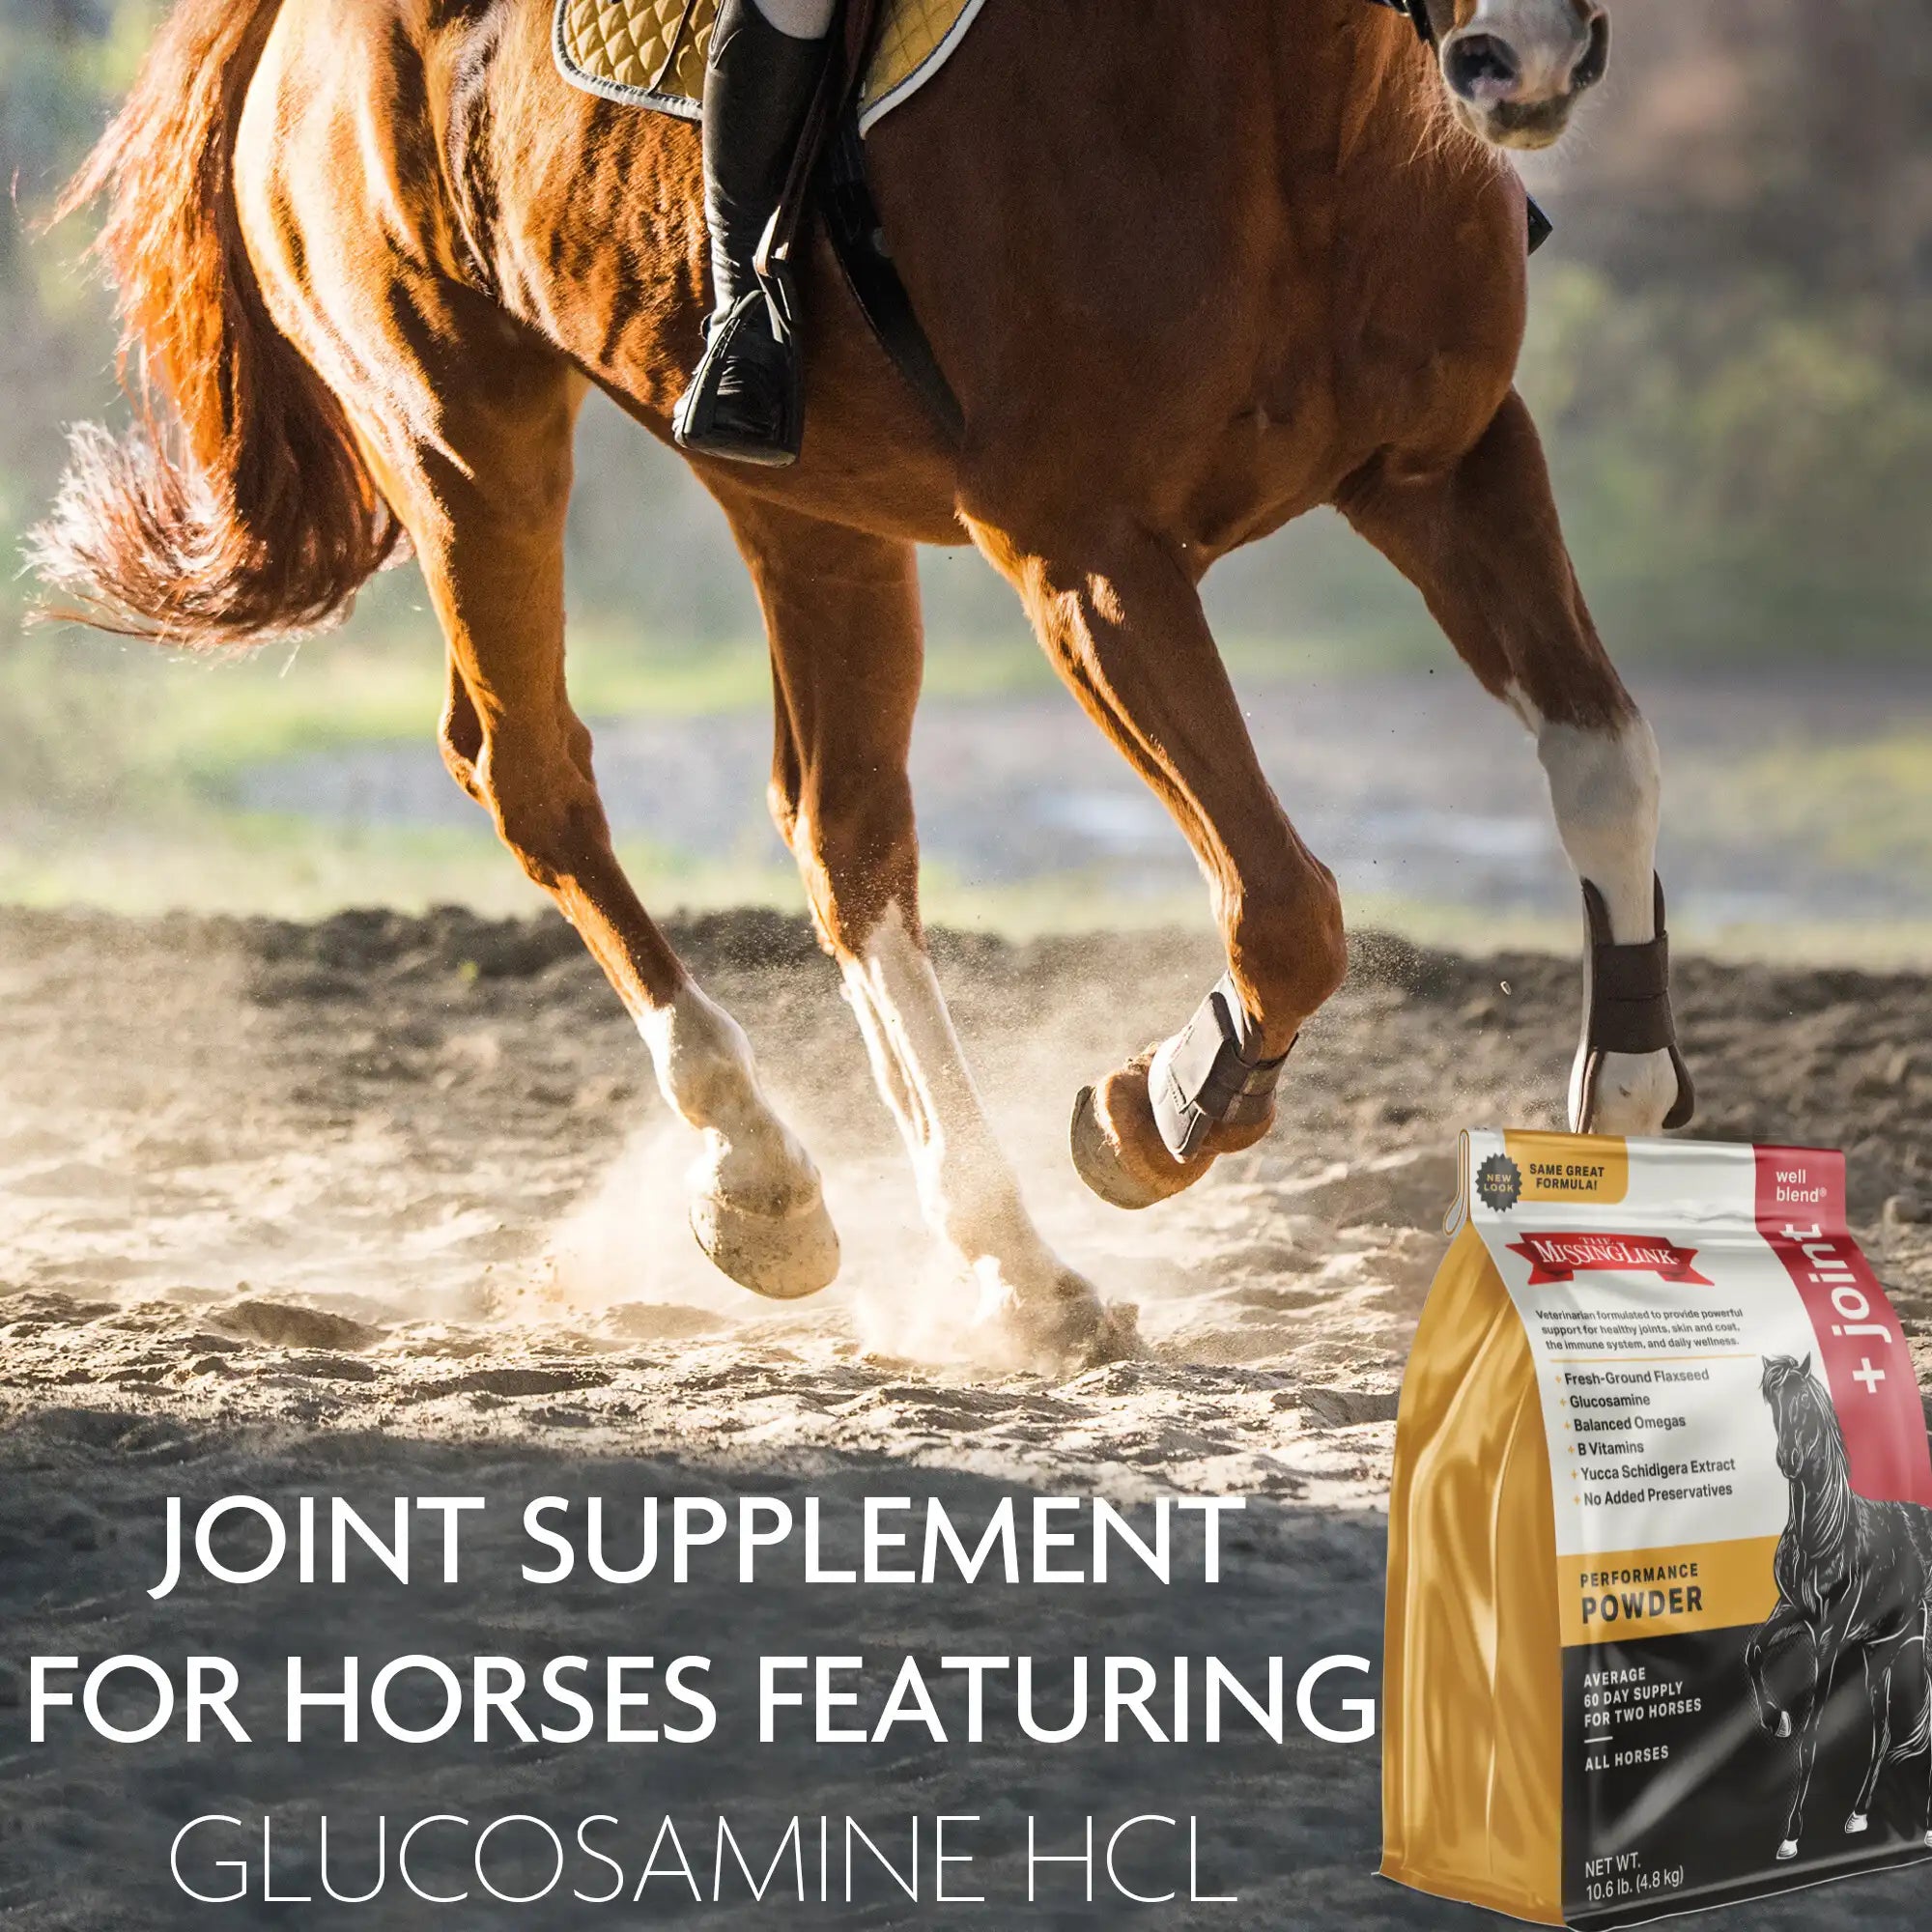 Horse riding around range with a bag of The Missing Link Well Blend + Joint performance joint supplement for horses featuring glucosamine HCL on the bottom right corner.